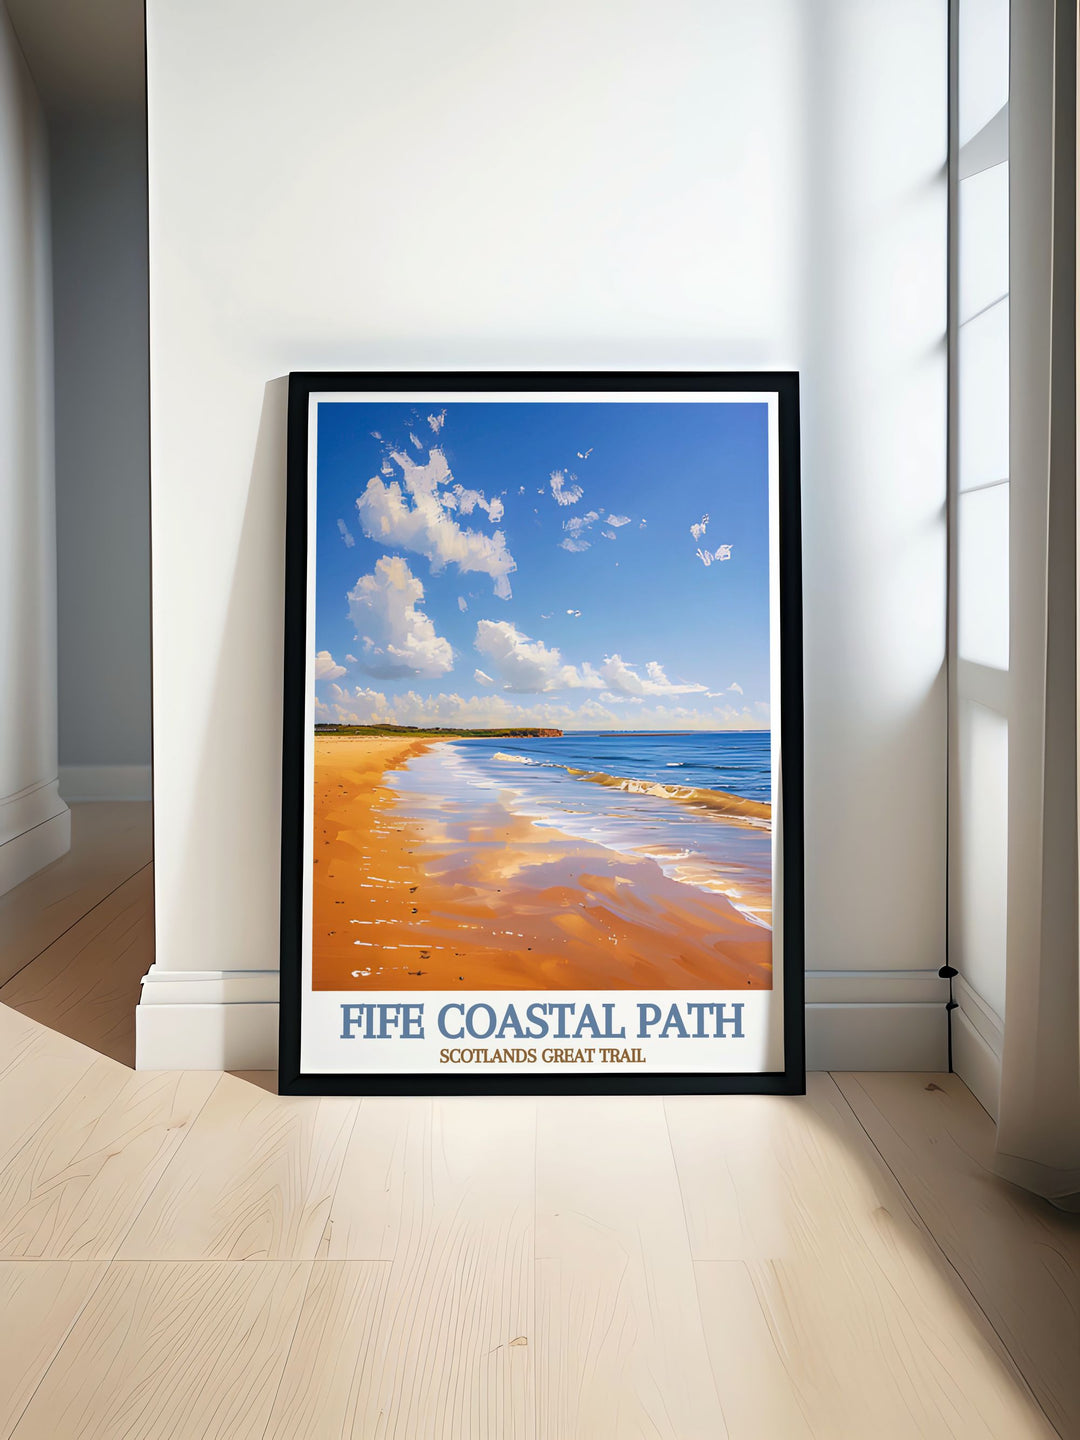 The serene coastal trail and historic harbor of the Fife Coastal Path are beautifully illustrated in this poster, highlighting the natural beauty of Scotland, perfect for your home decor.